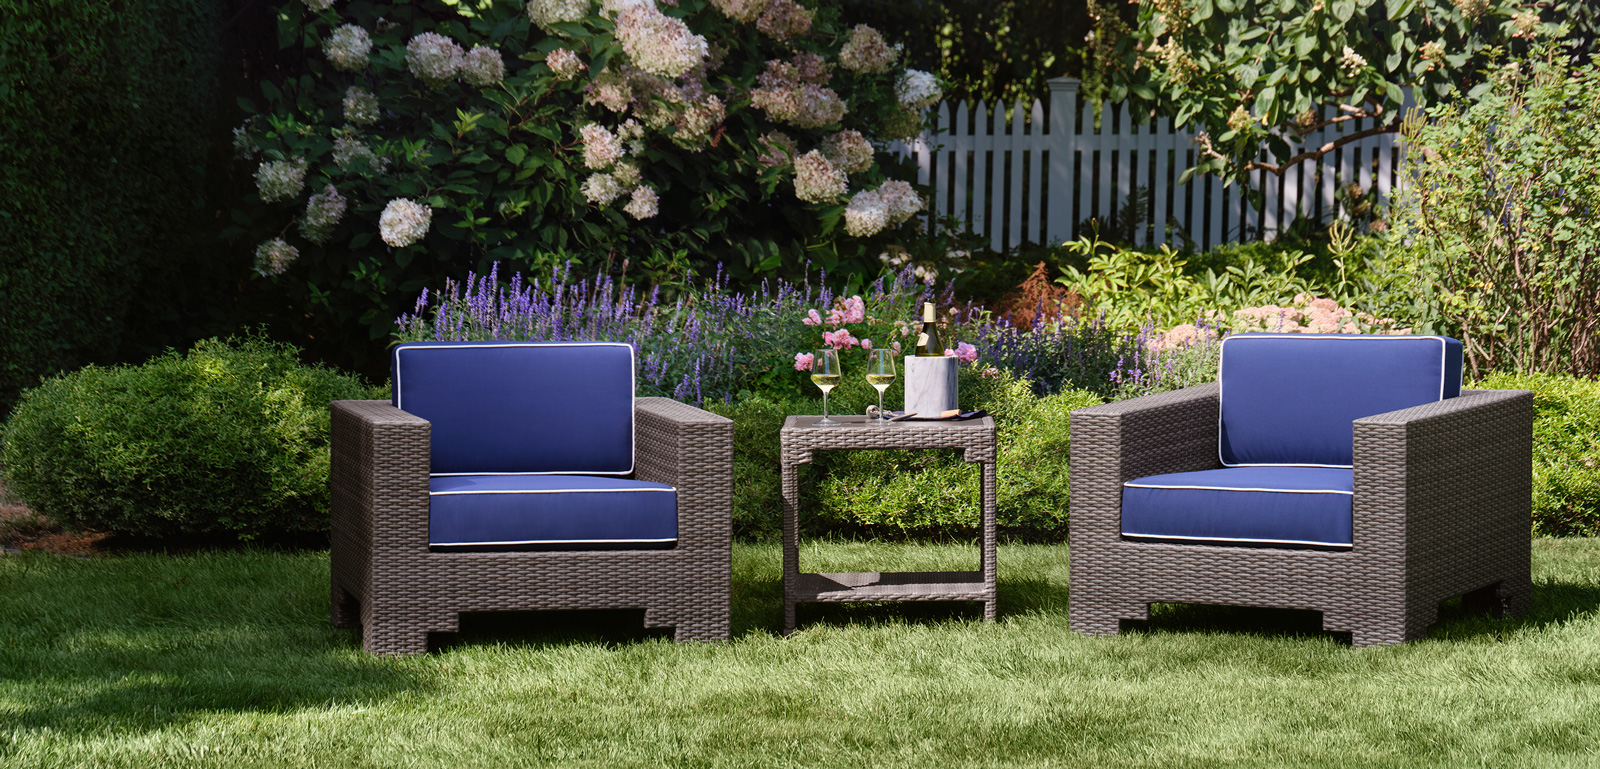 Lorenzo outdoor woven lounge chairs in brown weave with dark blue cushions.